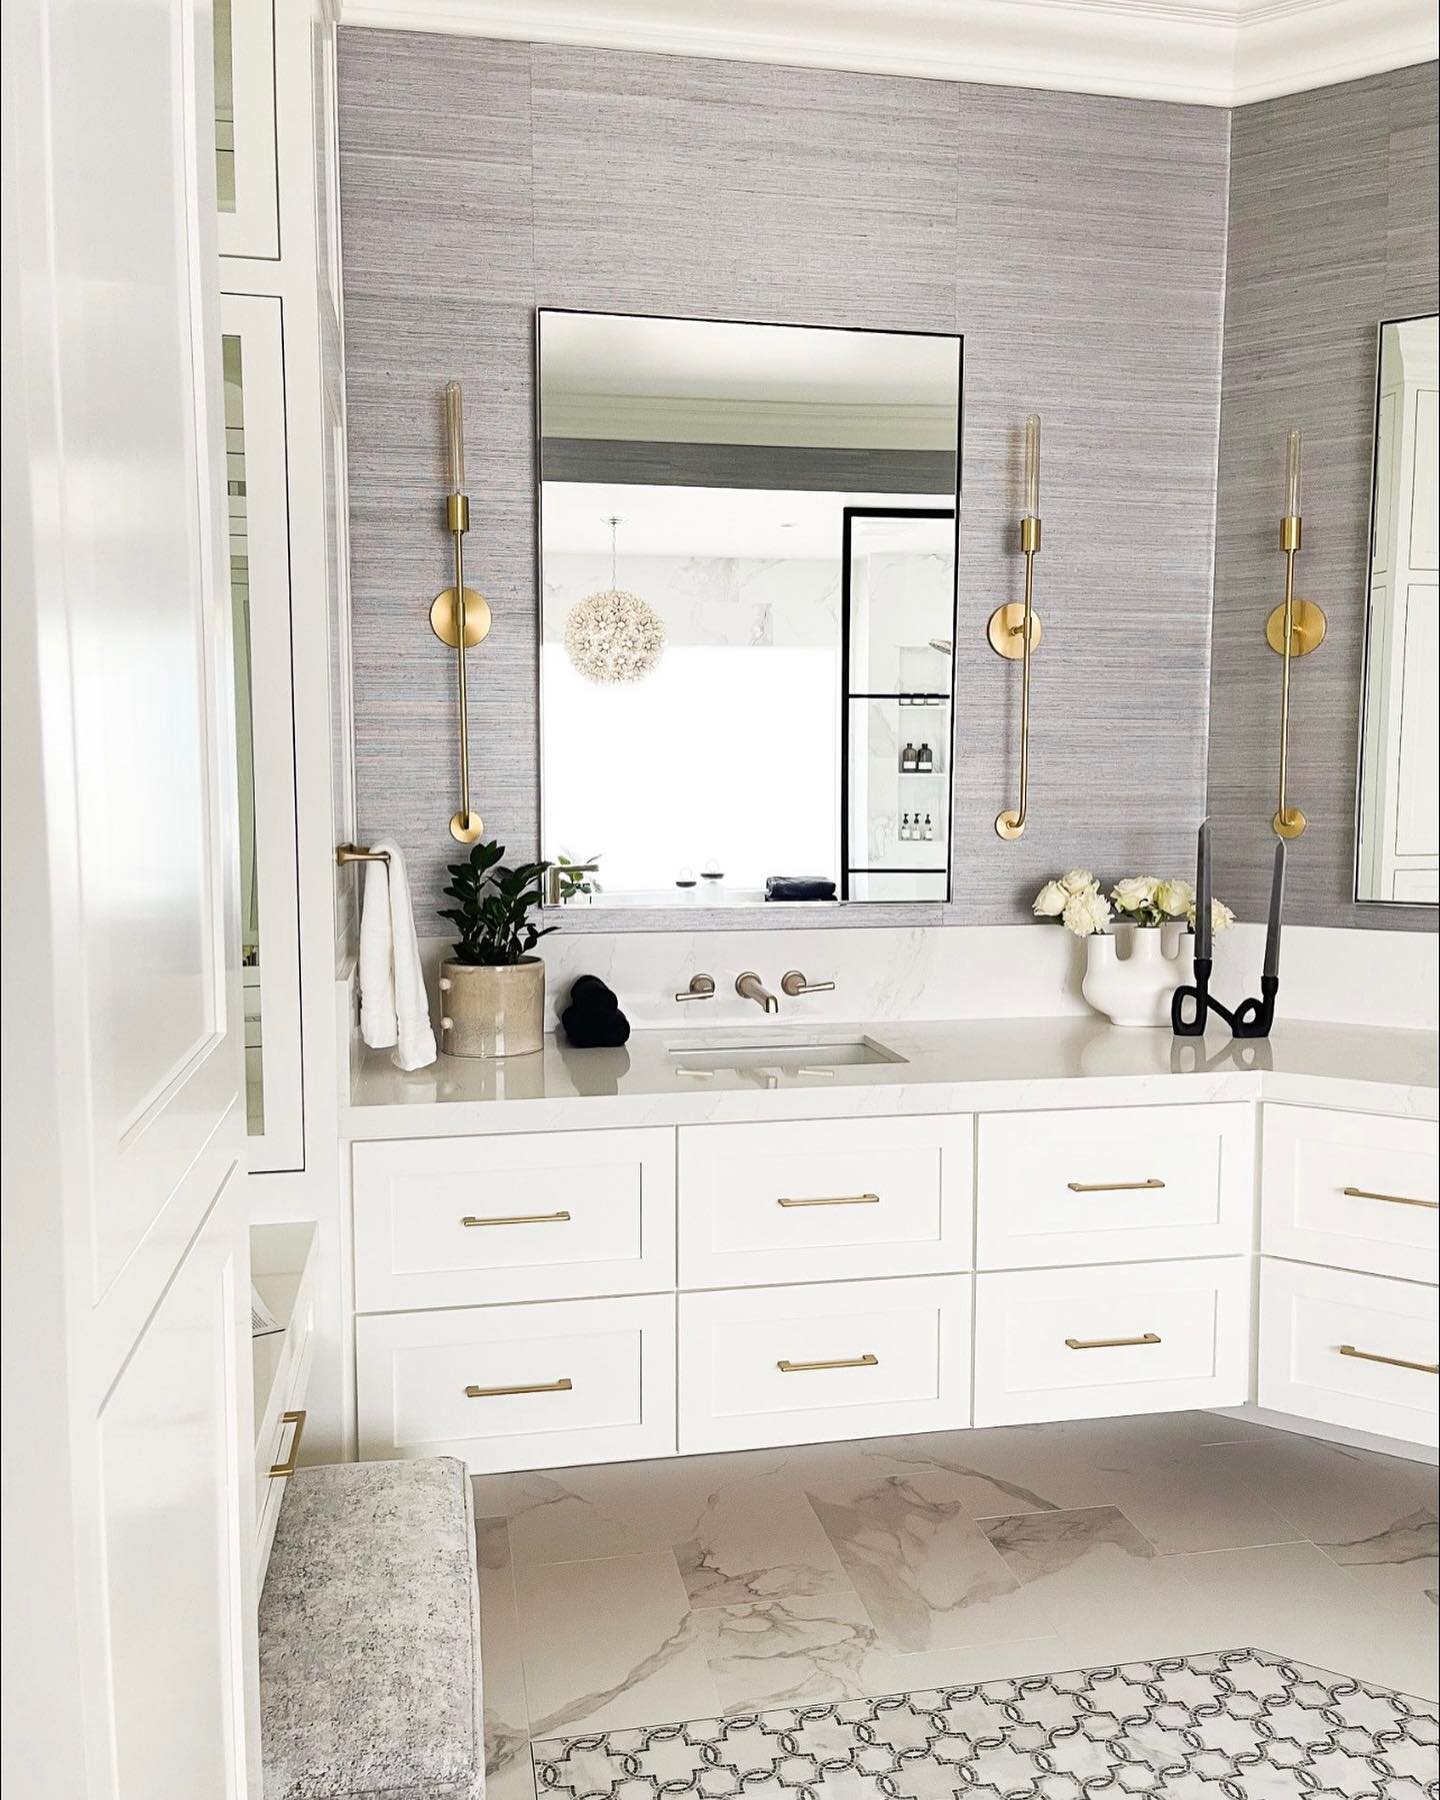 What a difference a remodel can make in our lives&hellip; Am I right? Swipe to see the before 👉🏼
.
.
Design @mollyerindesigns 
Builder @tankersley_construction 
.
.
#remodel #homerenovation #masterbathroom #bathroomdesign #luxebath #design